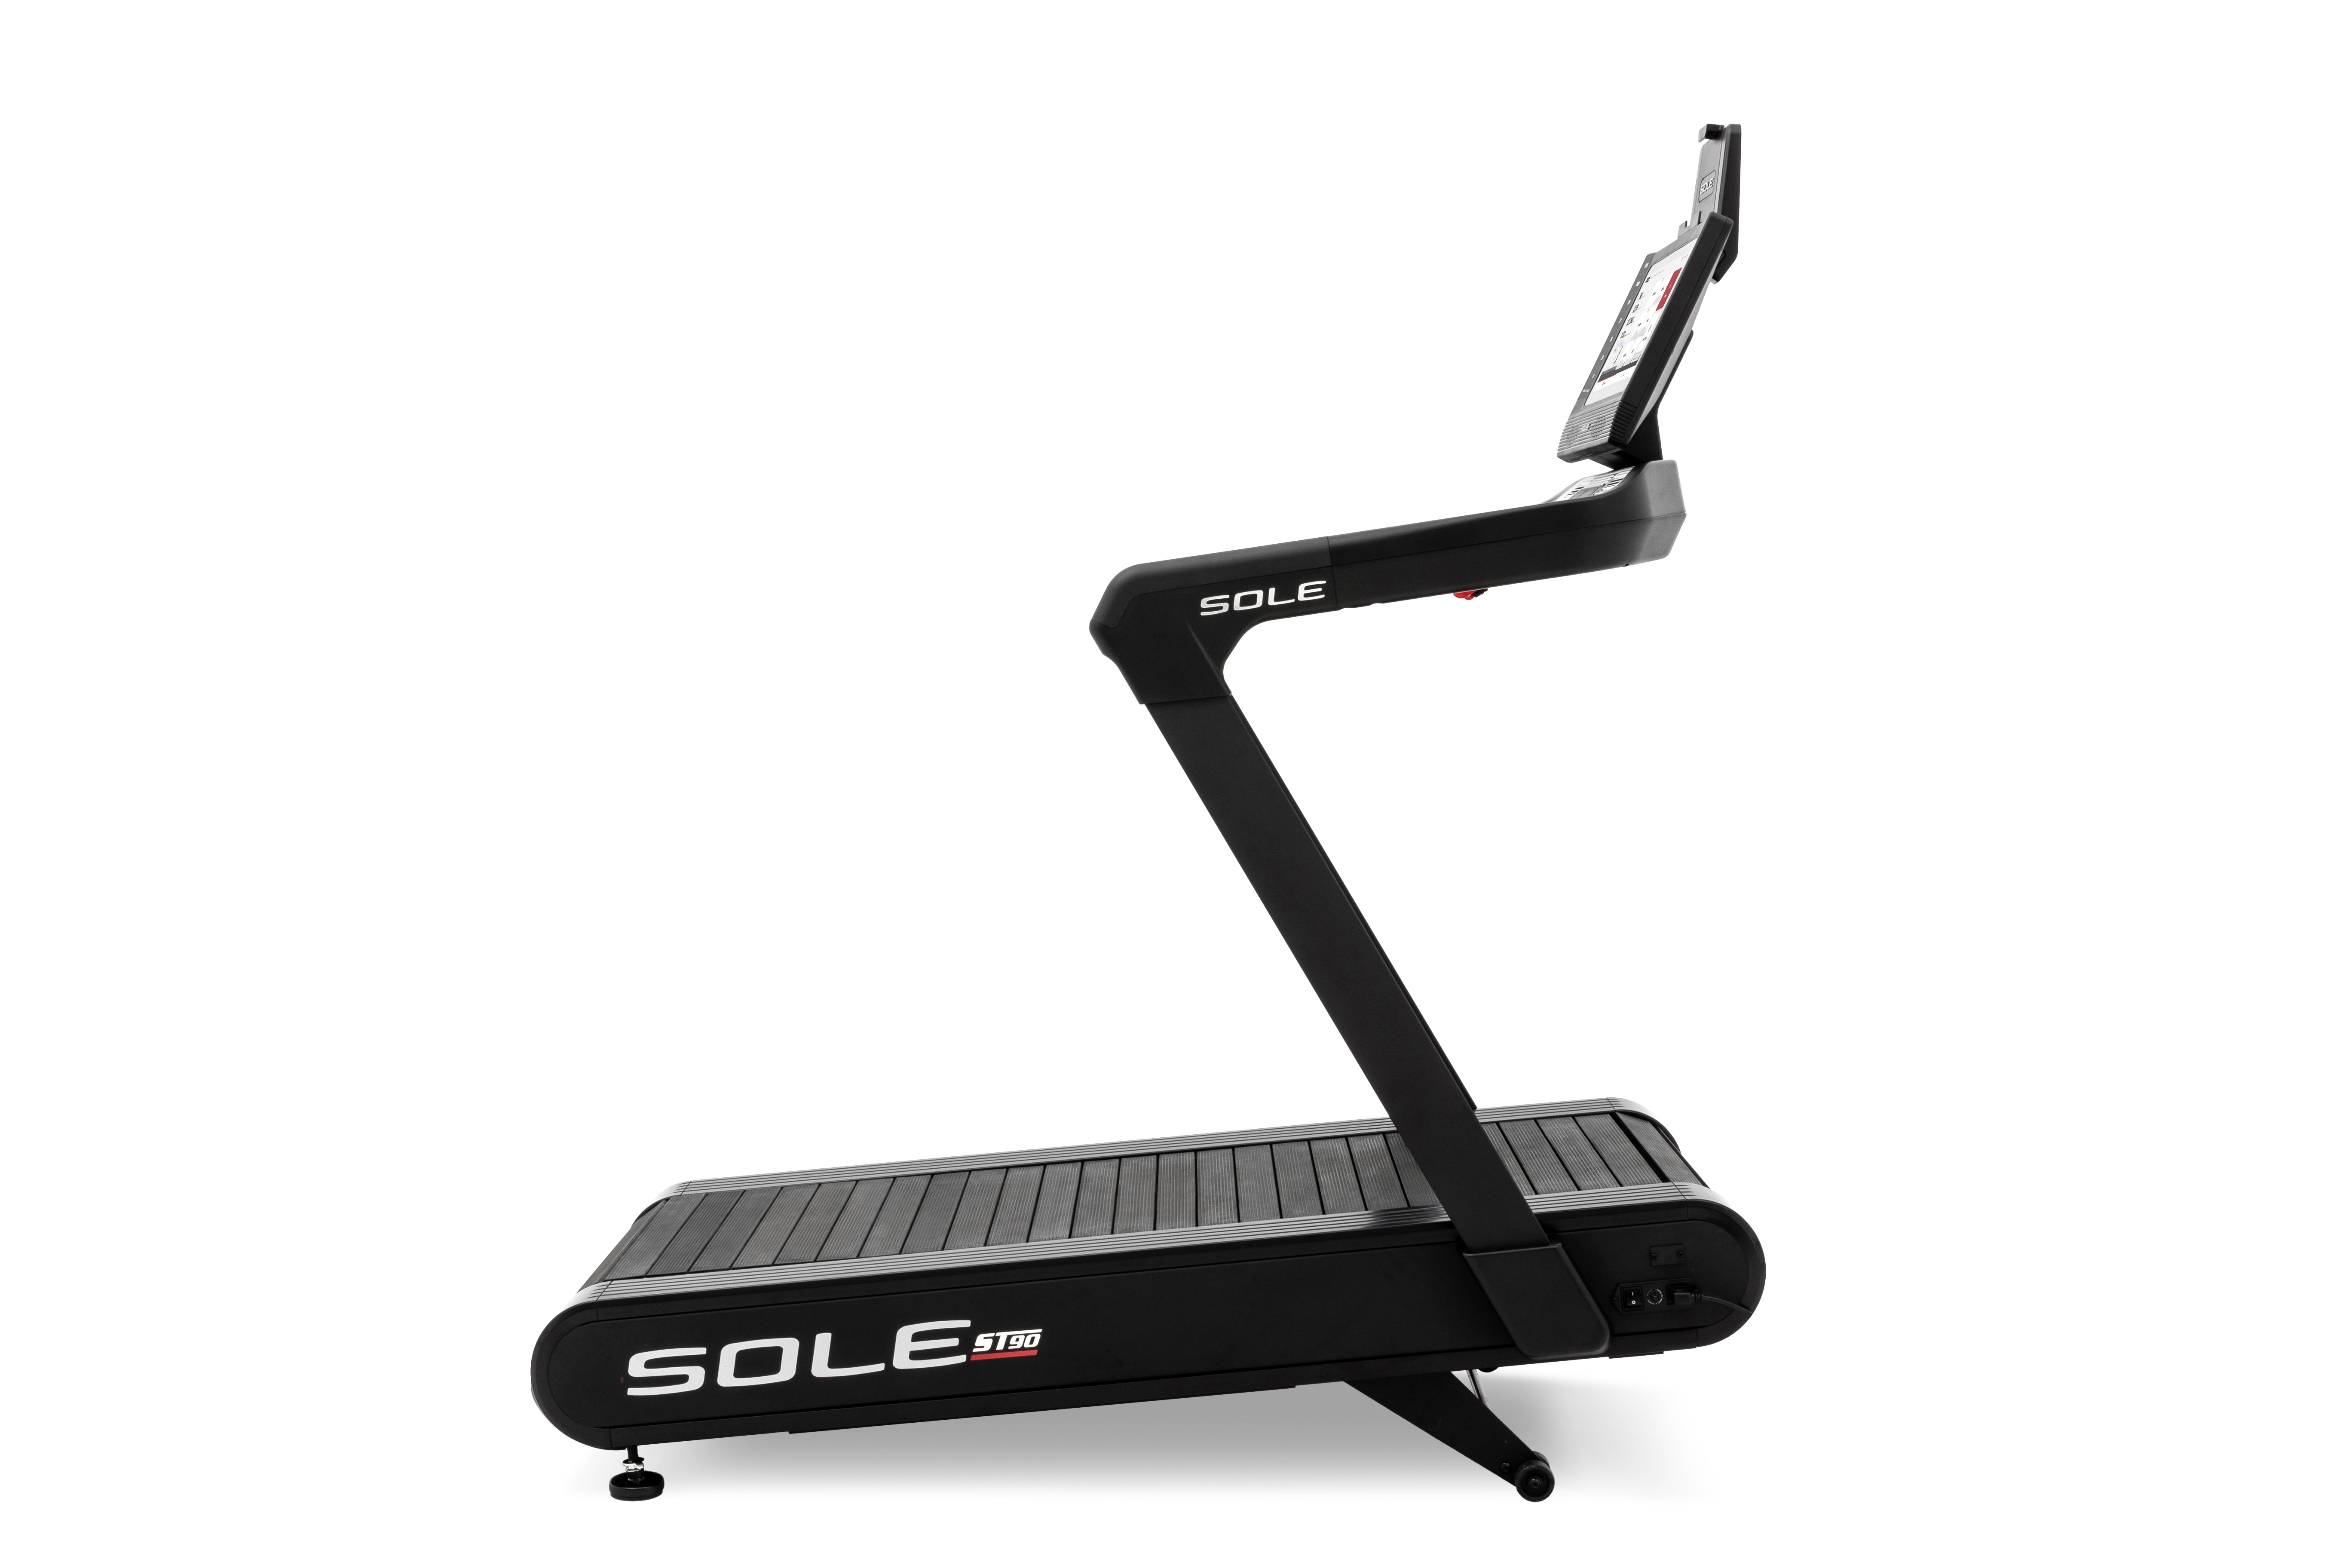 Angled view of the Sole ST90 treadmill showcasing its black frame, digital touchscreen console, branded running belt, and sturdy side arms, all against a white backdrop.